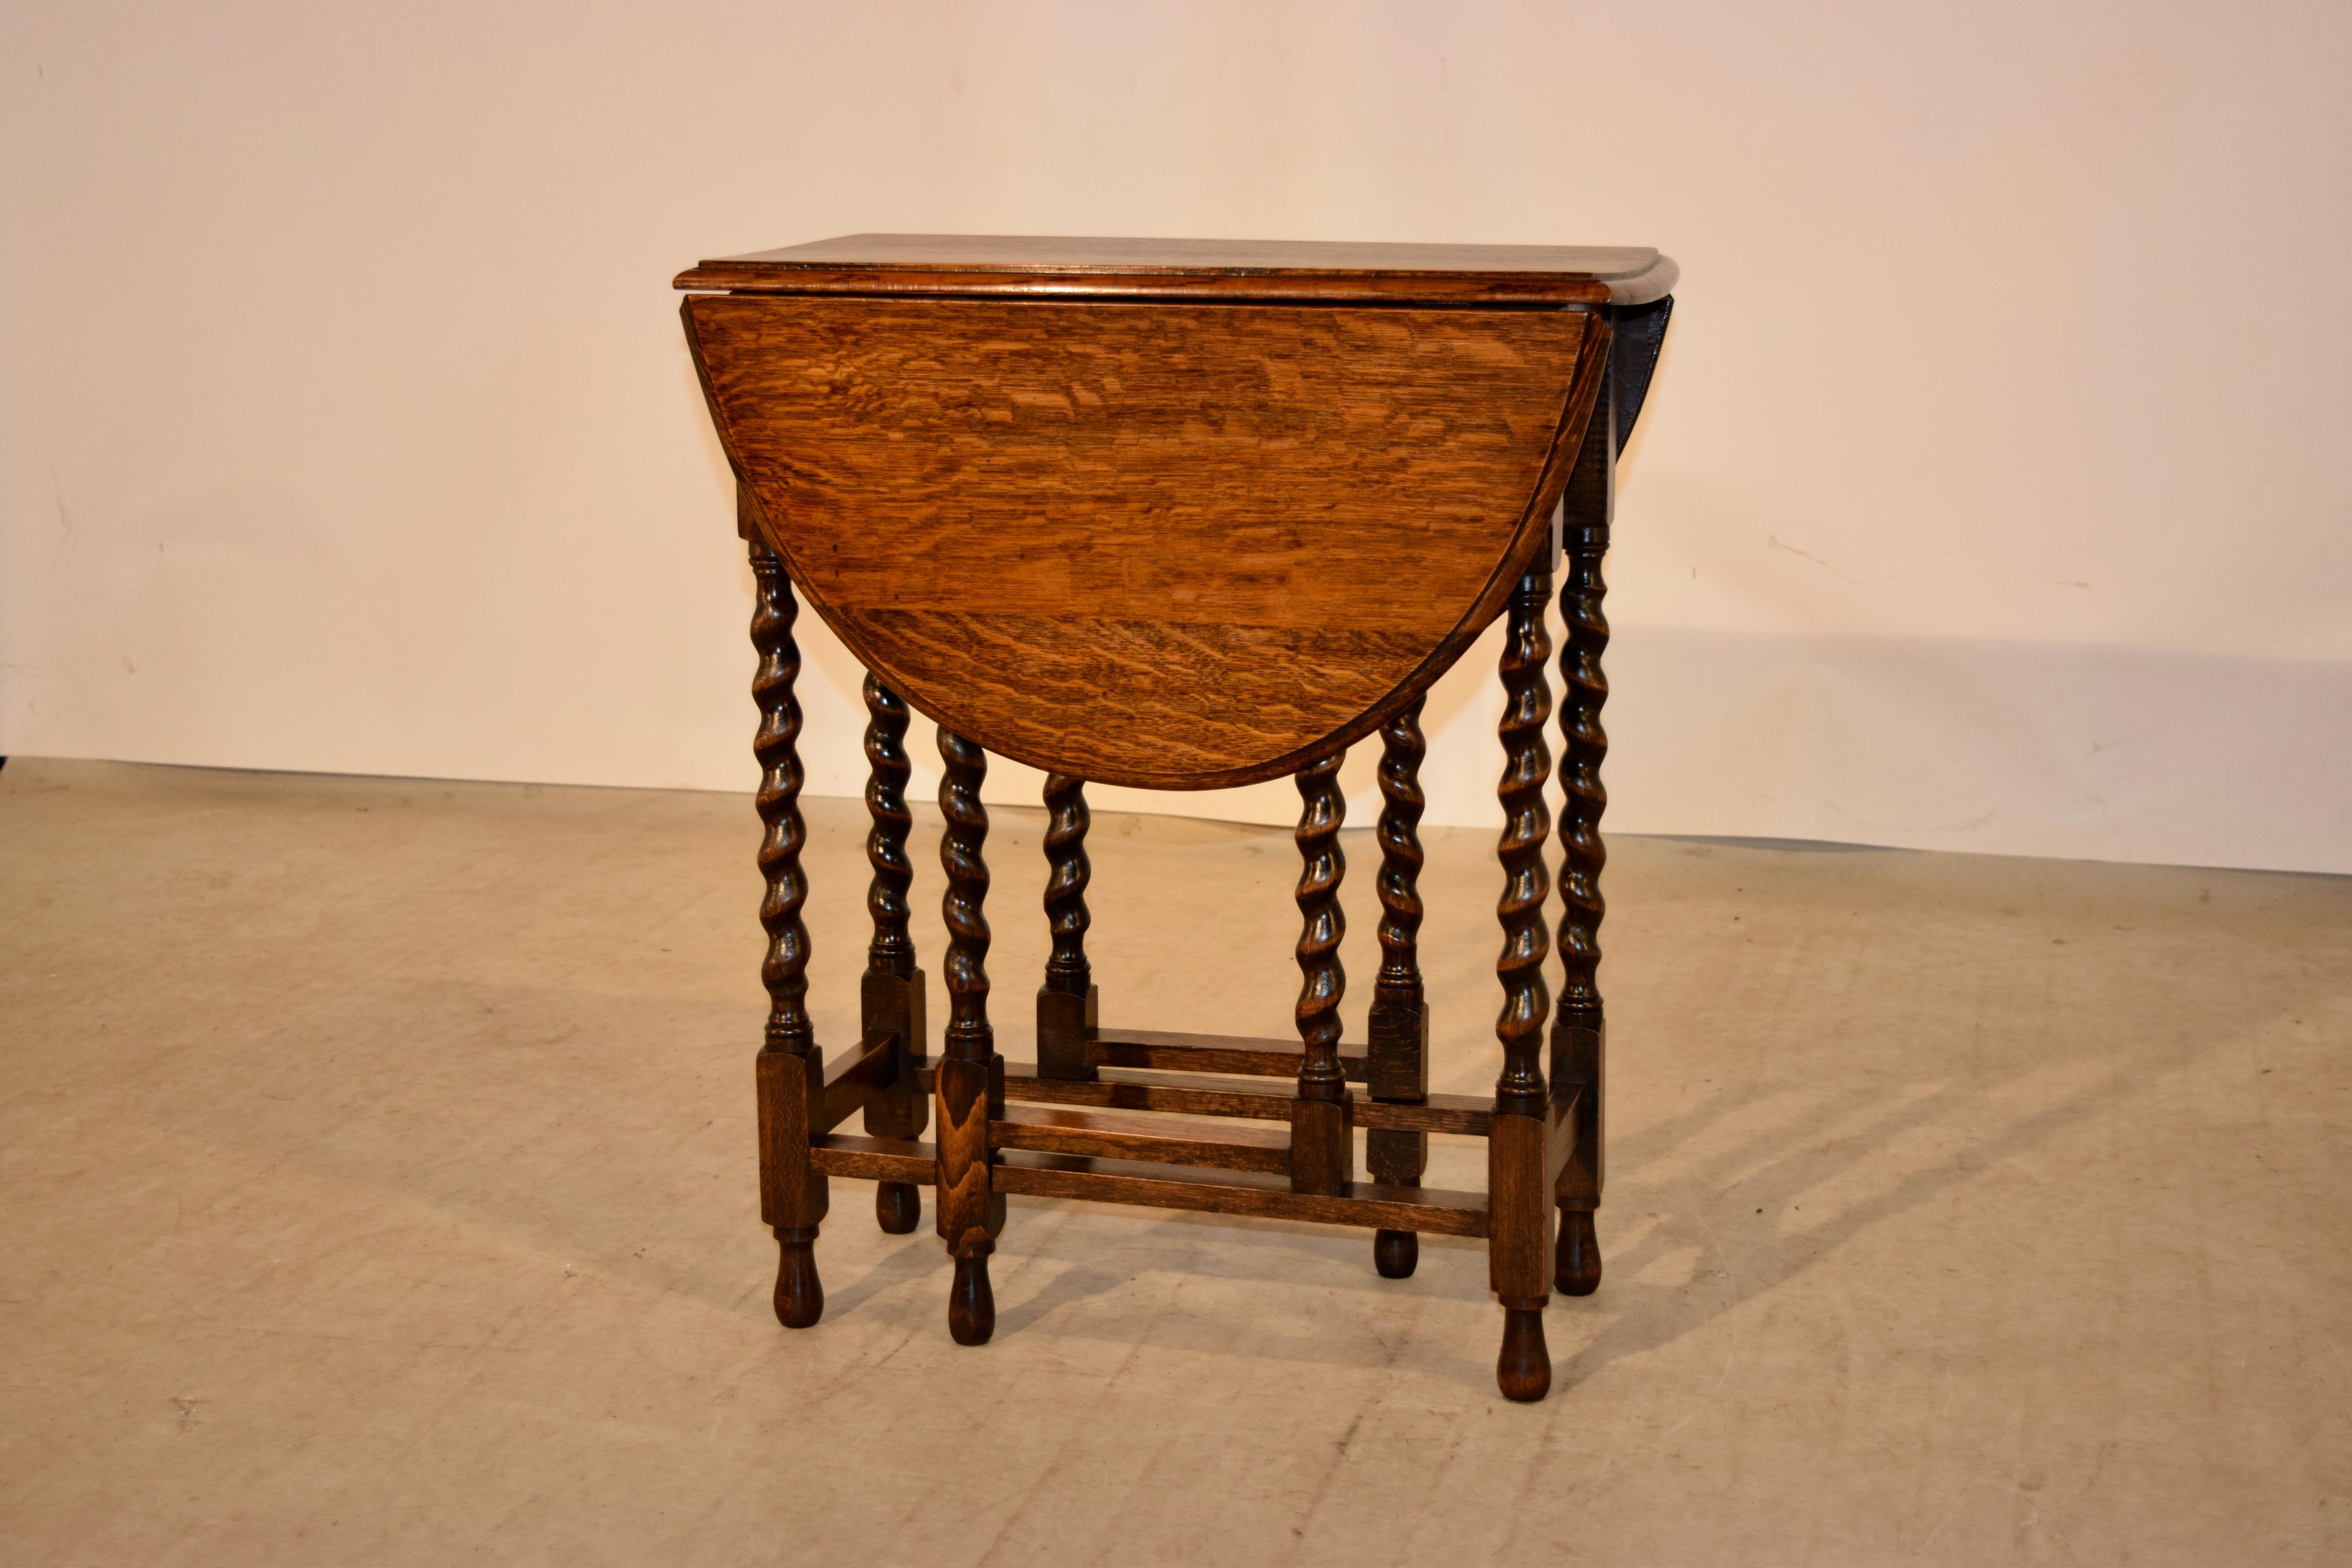 English oak gate leg table from England, circa 1900 with a beveled edge around the top, following down to a simple apron and hand turned barley twist legs, joined by simple stretchers. Supported on hand turned feet. Top open measures 35.75 x 24.5.